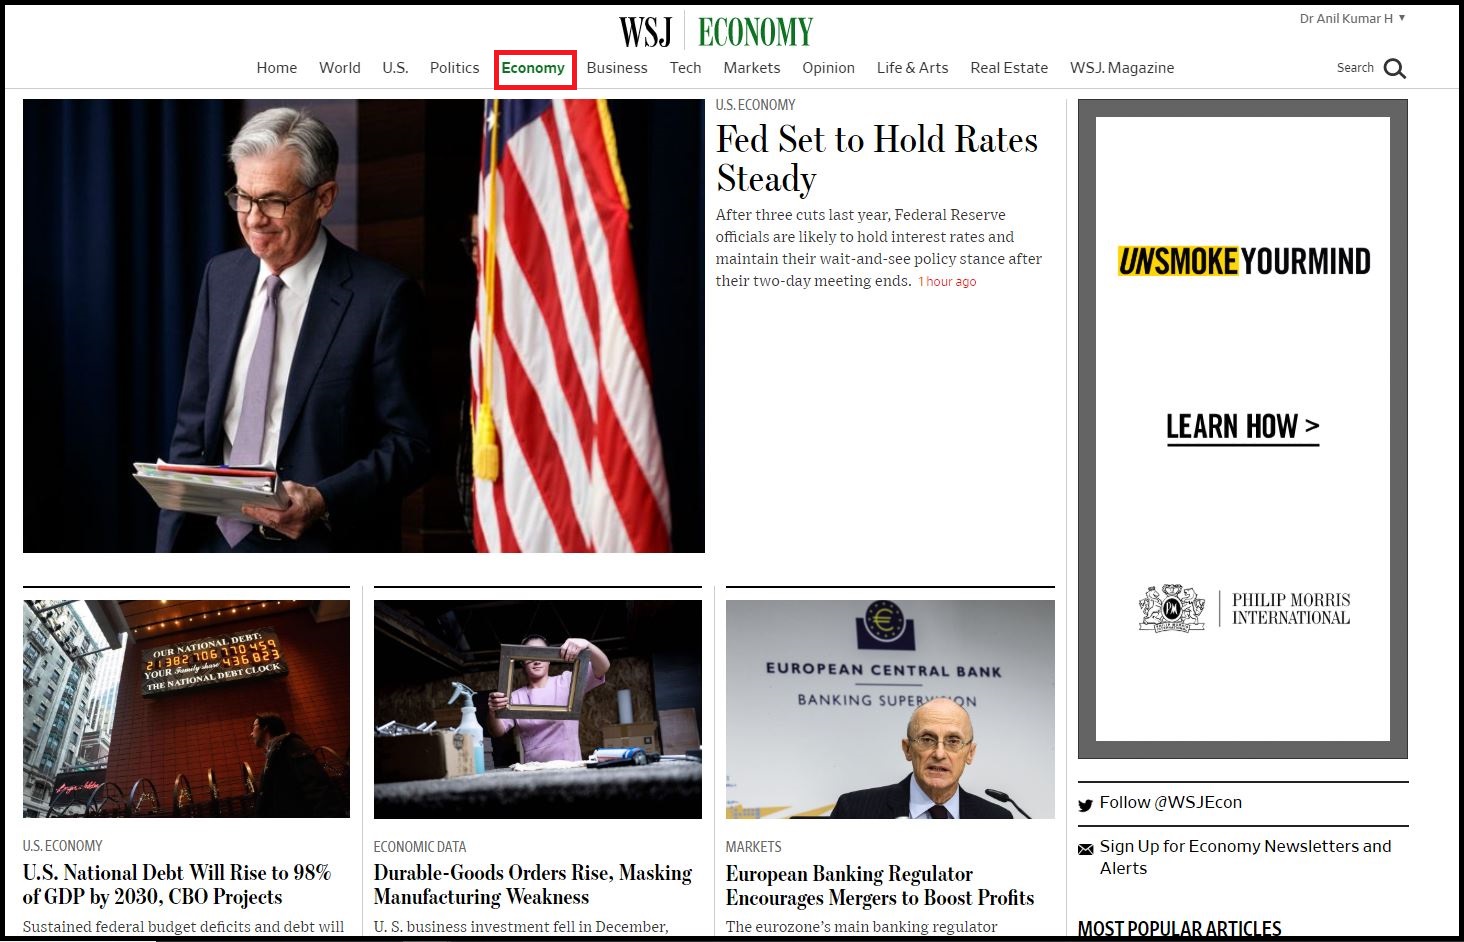 Open Wall Street Journal then Login with WSJ Credentials and Click on Economy 